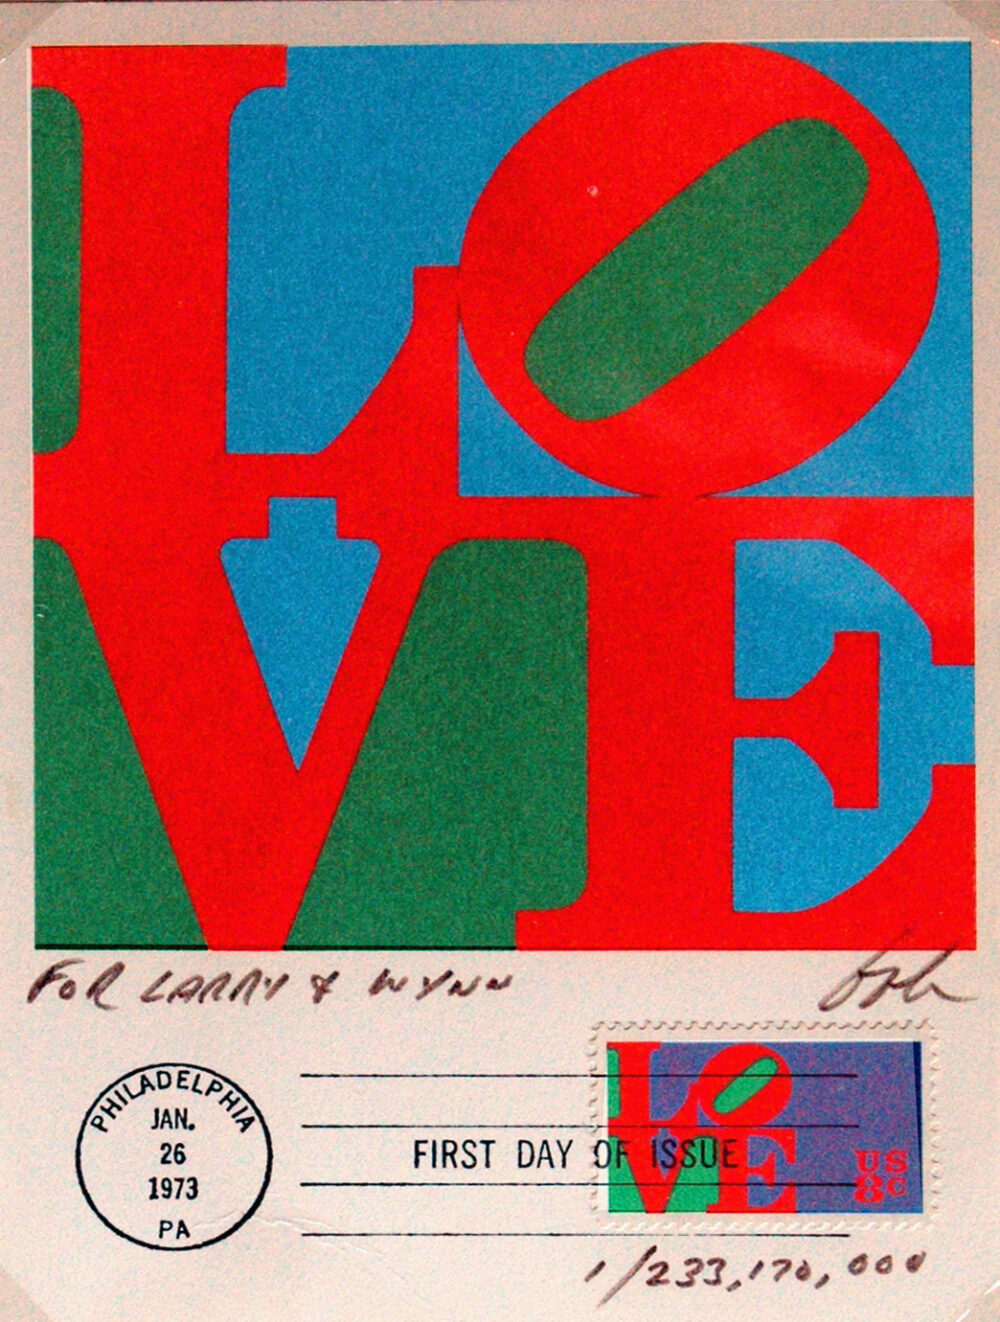 iconic love work by robert indiana in stamp form on a postcard with same love work